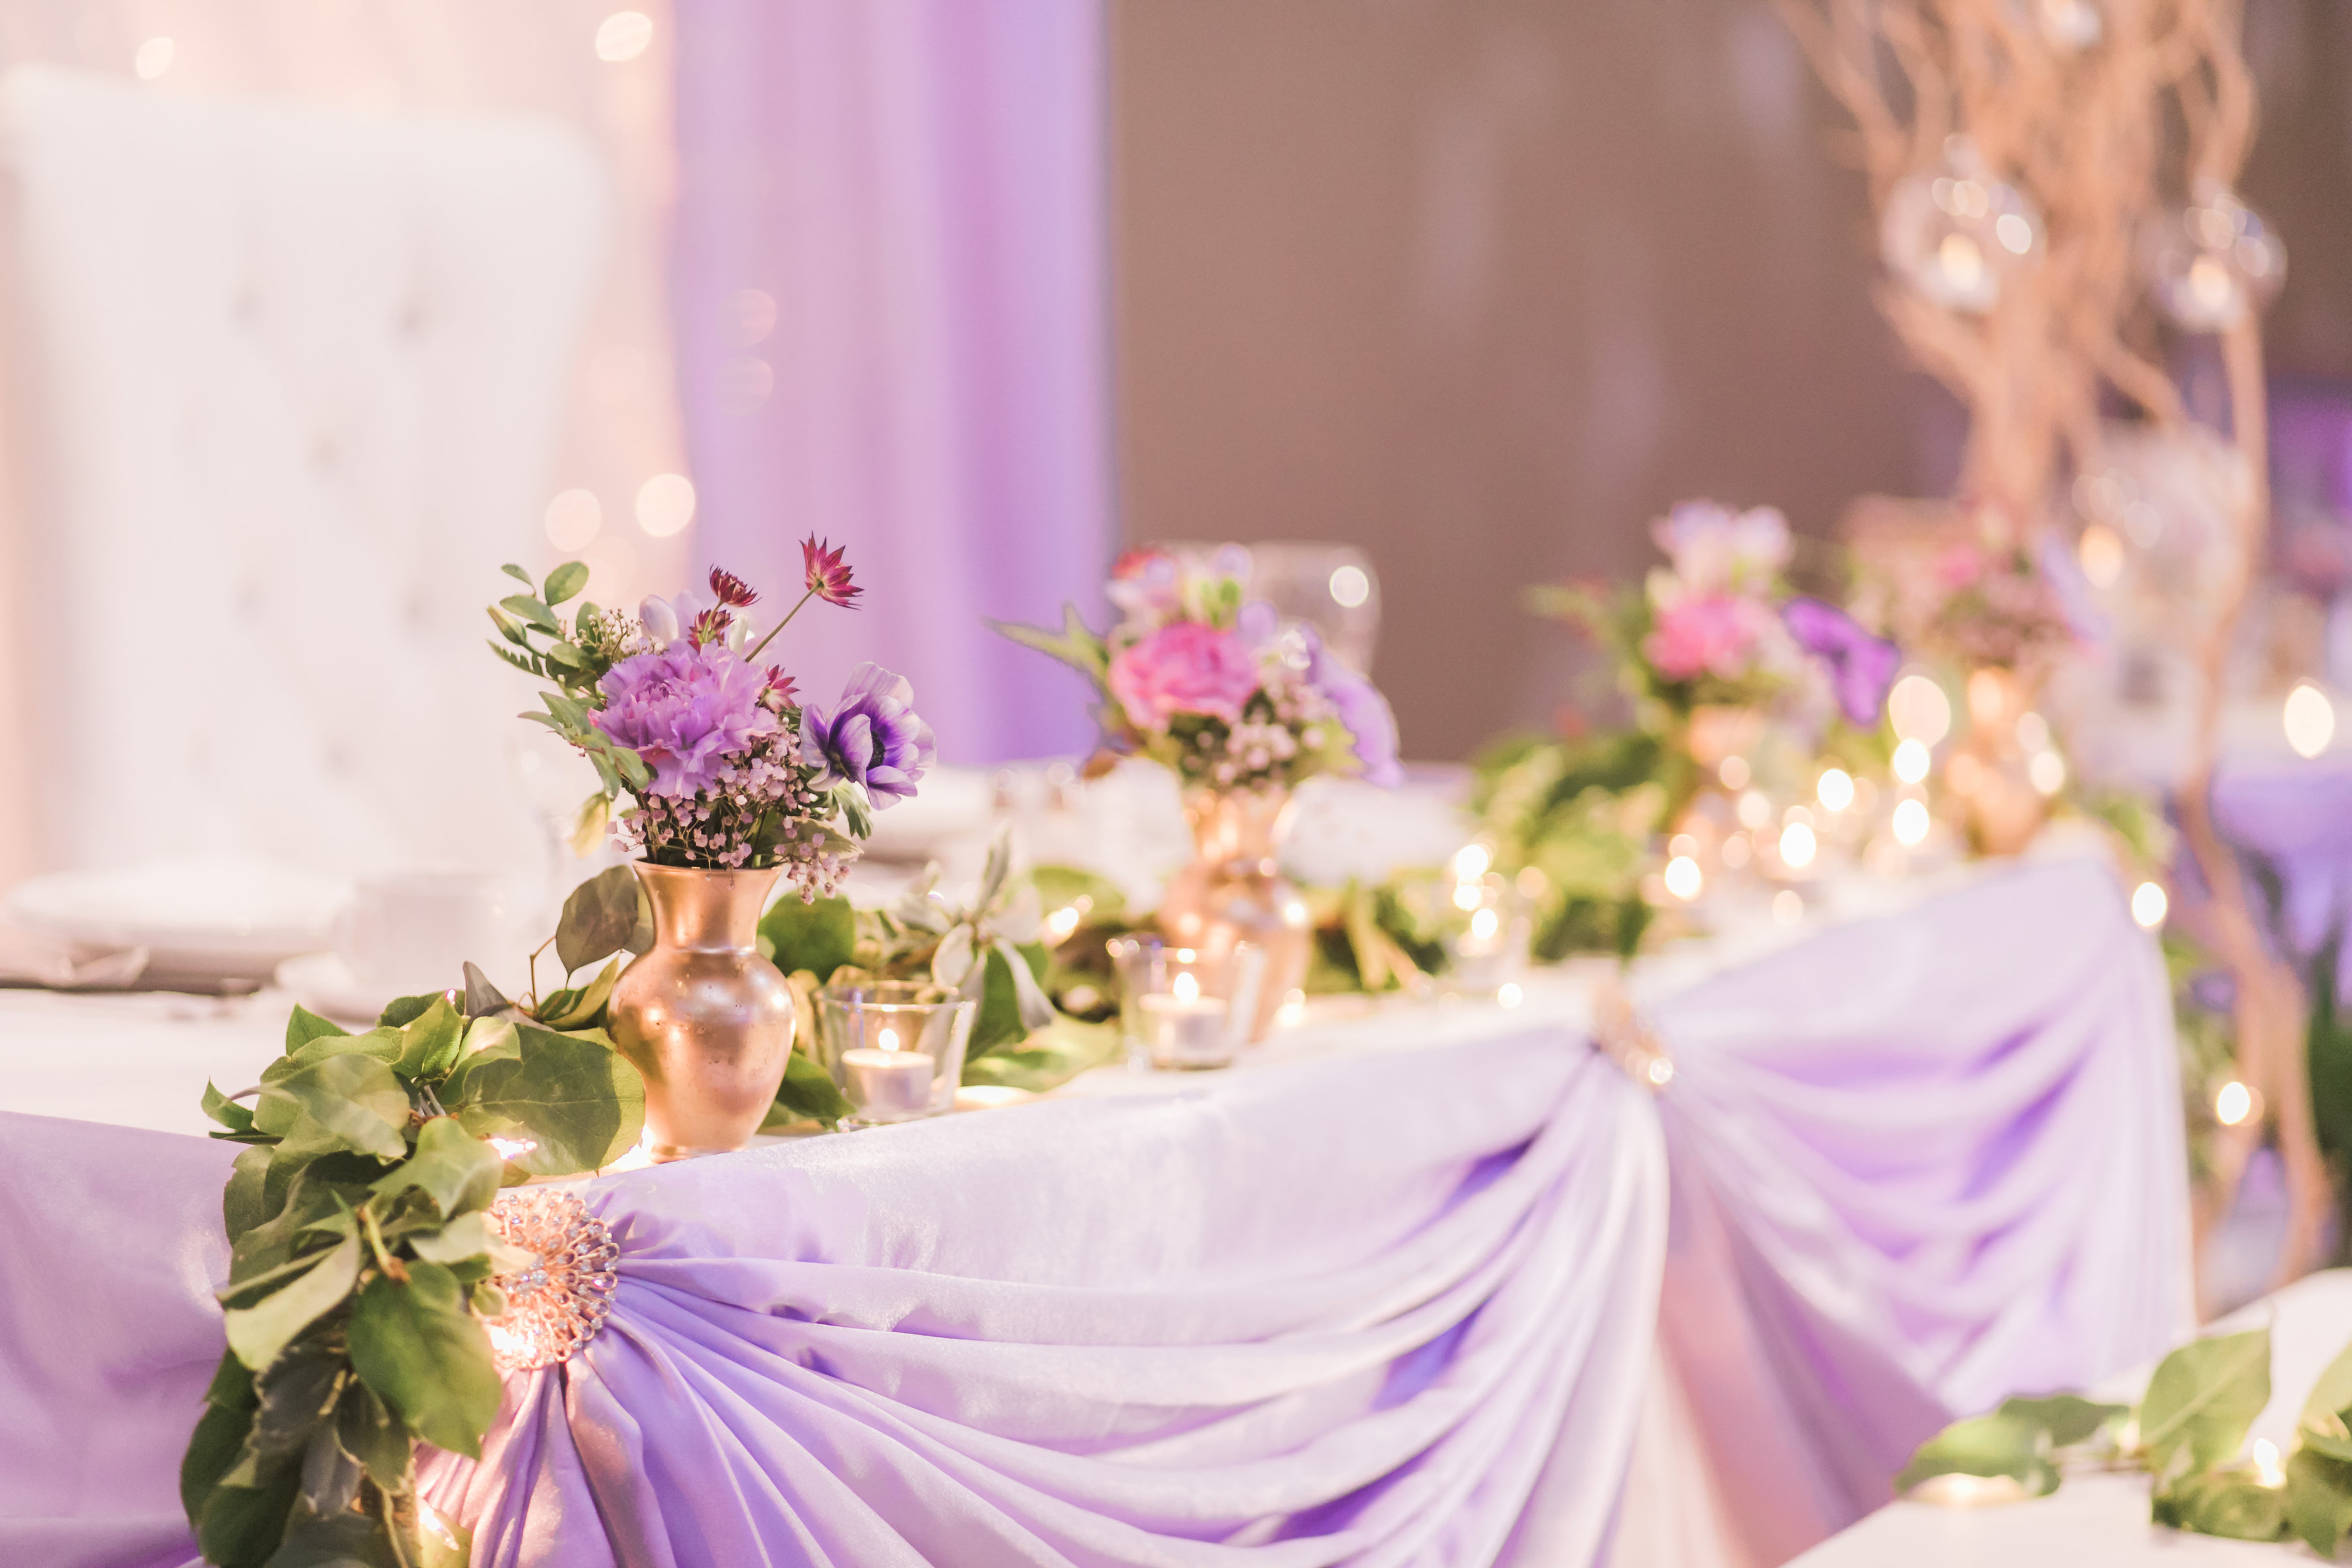 Wedding reception, with twinkle lights backdrop, and lavender head table. Purple flowers in gold bud vases. Toronto wedding flowers and decor at Fontana Primavera by Secrets Floral.